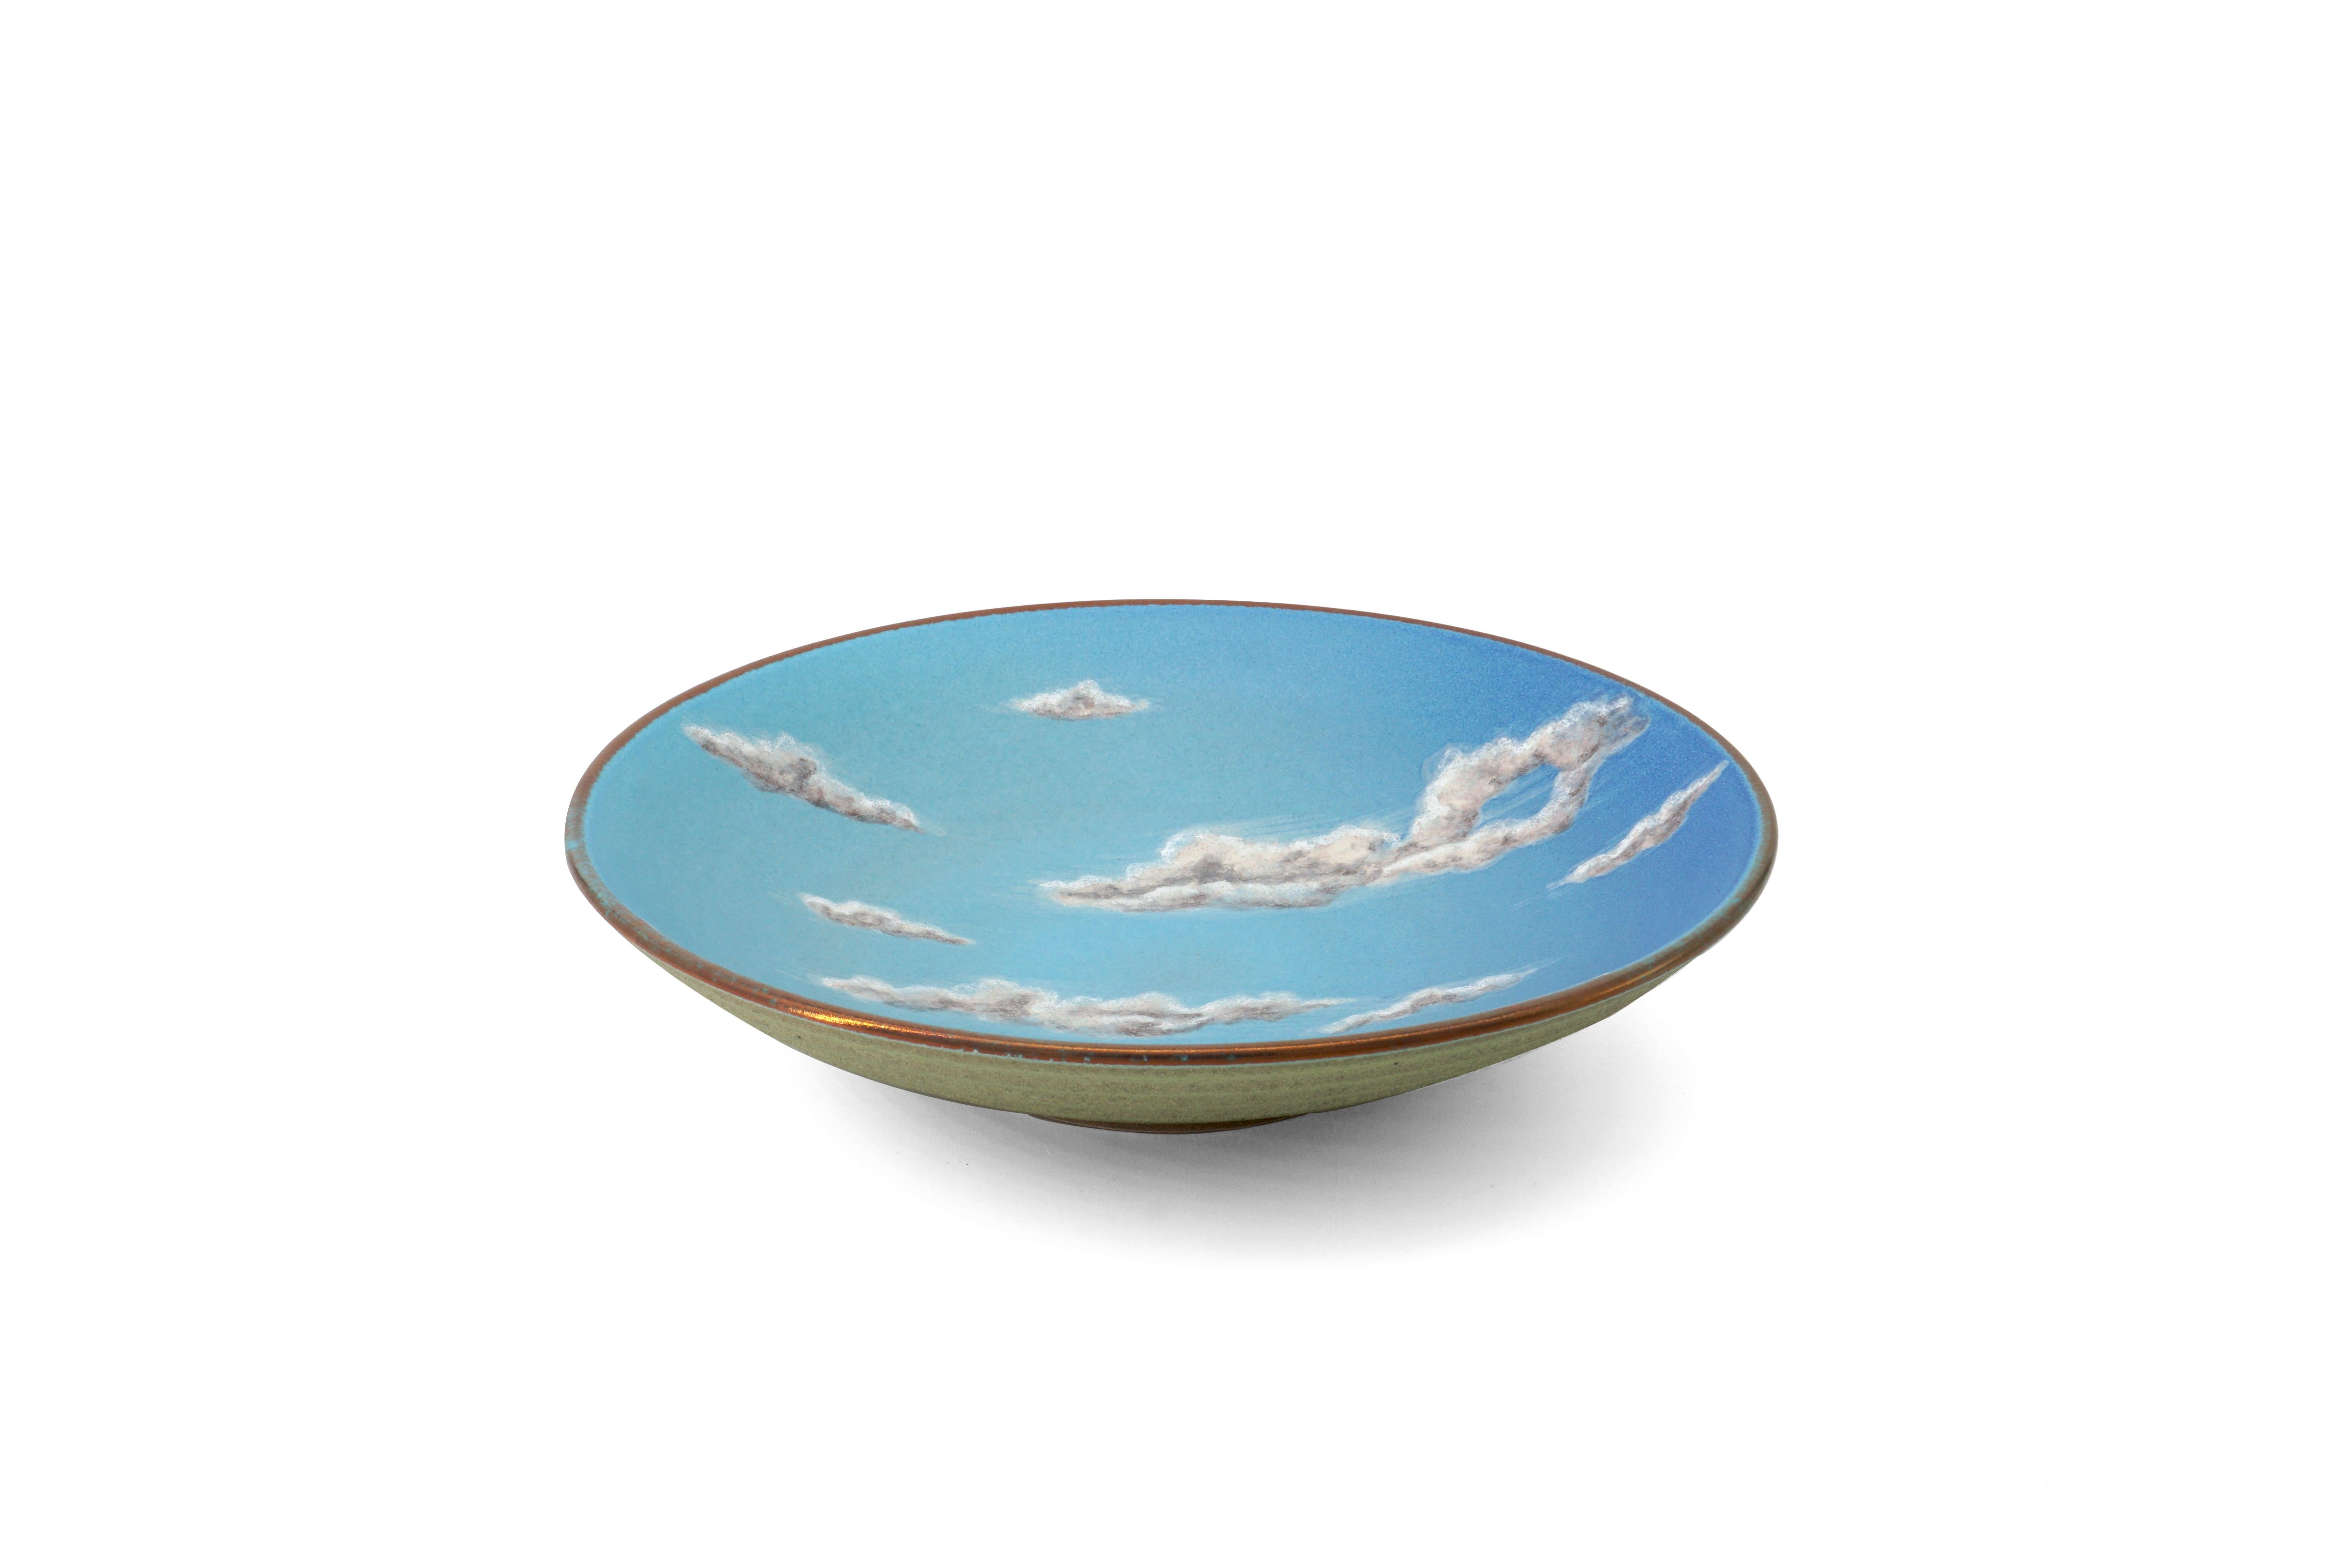 SKY - Medium ceramic bowl by Pantoù Ceramics, hand thrown and hand painted glazed earthenware. 
All unique pieces, Italy, 2021. Measure: 22cm diameter. 

Different finishes available for the bowl exterior: see images. 

Pantoù Ceramics is an